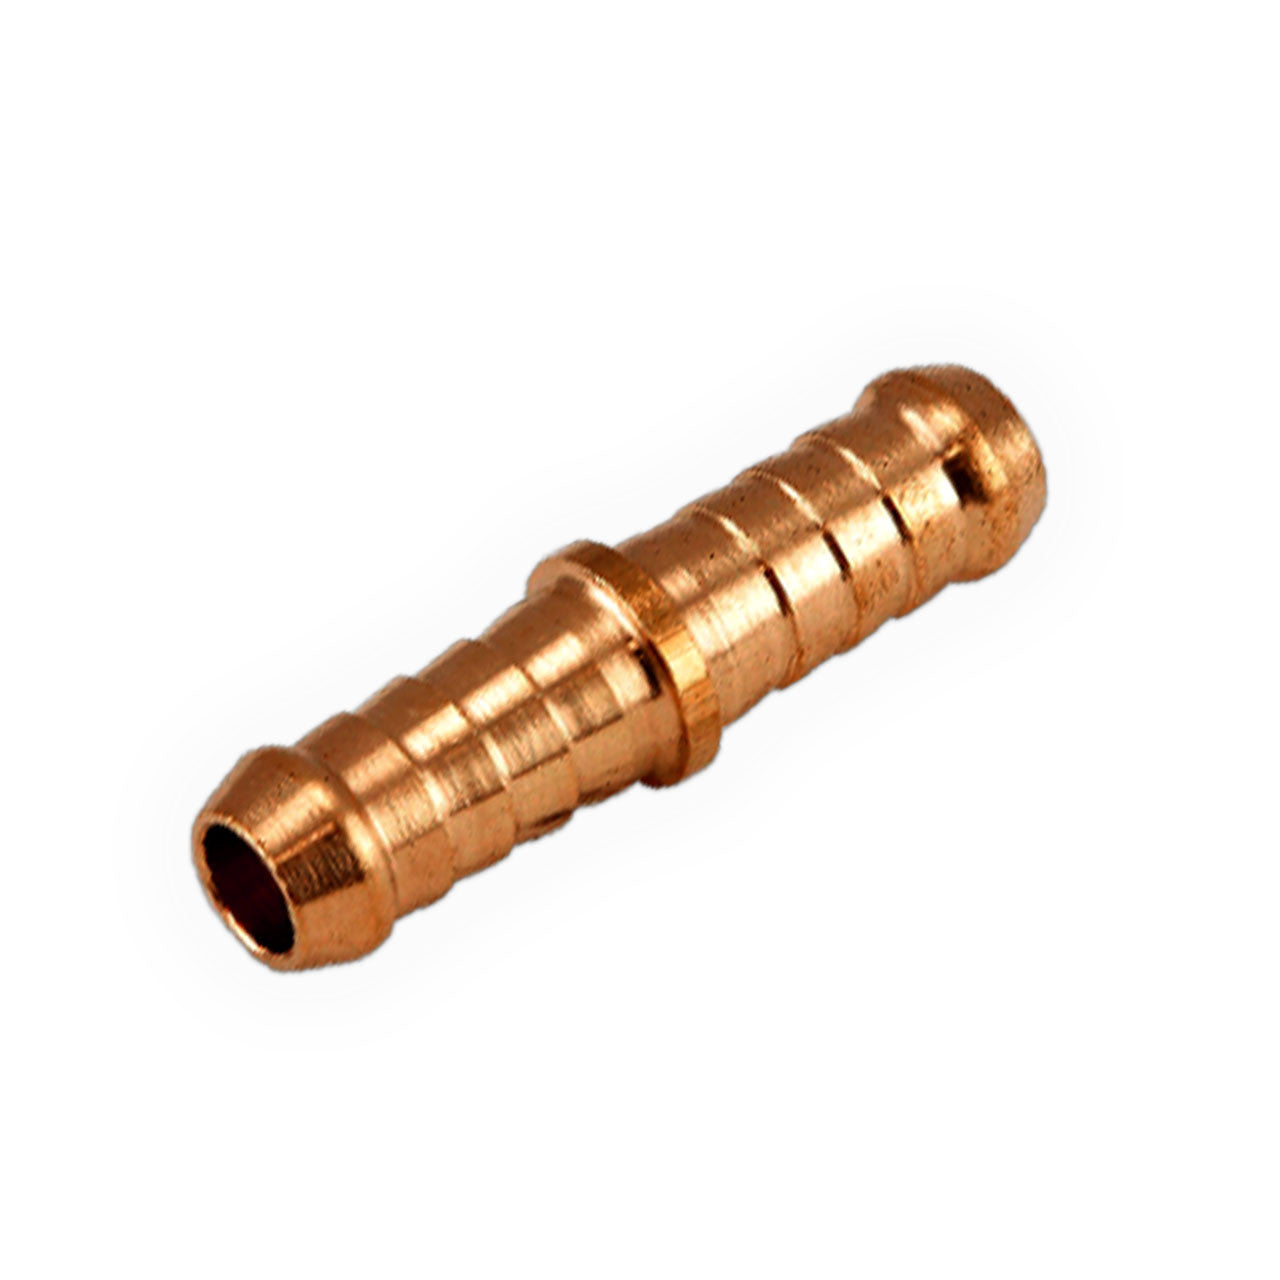 12mm (1/2") Straight Brass Hose Joiner 07P.708 for Fuel Manager Pre Filter